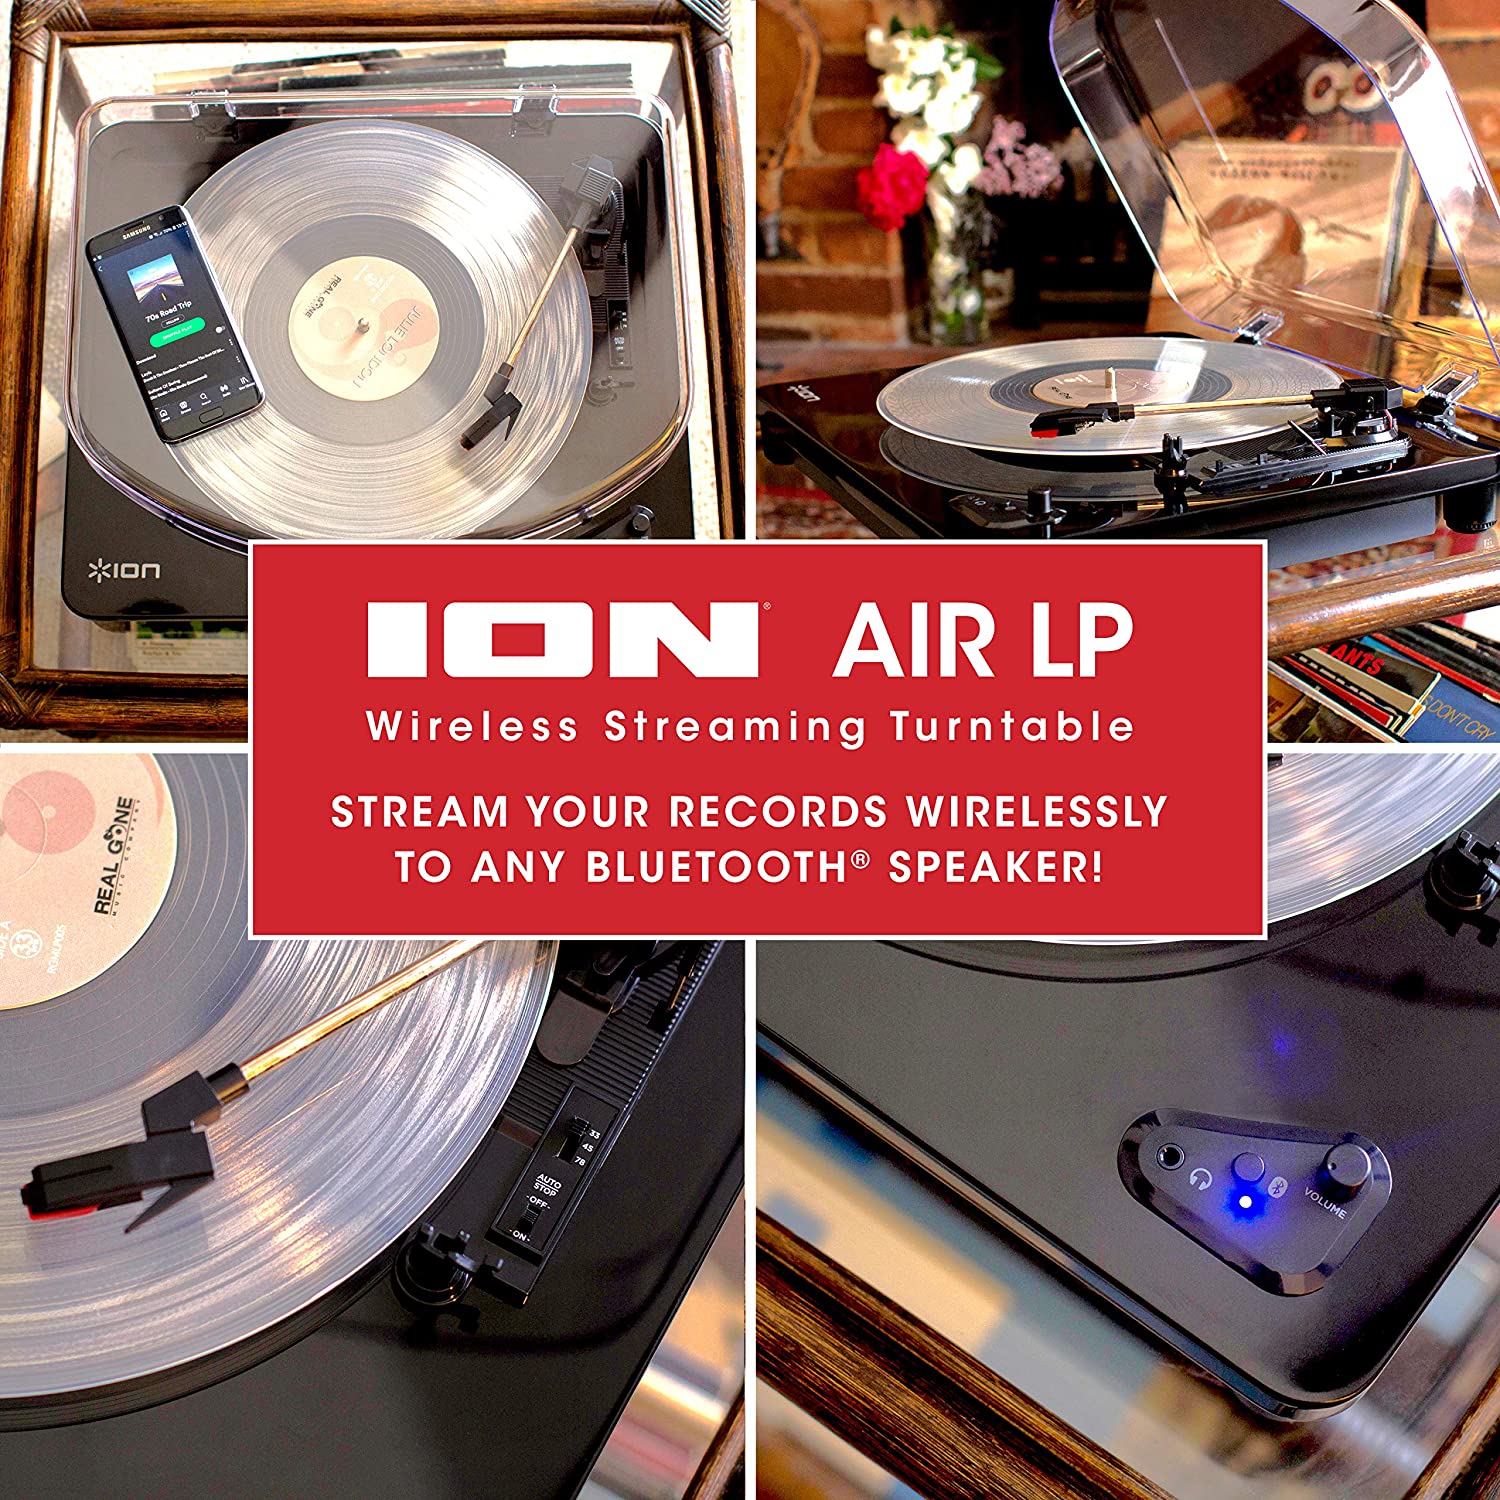 ION Air LP Wireless Streaming Turntable - Black